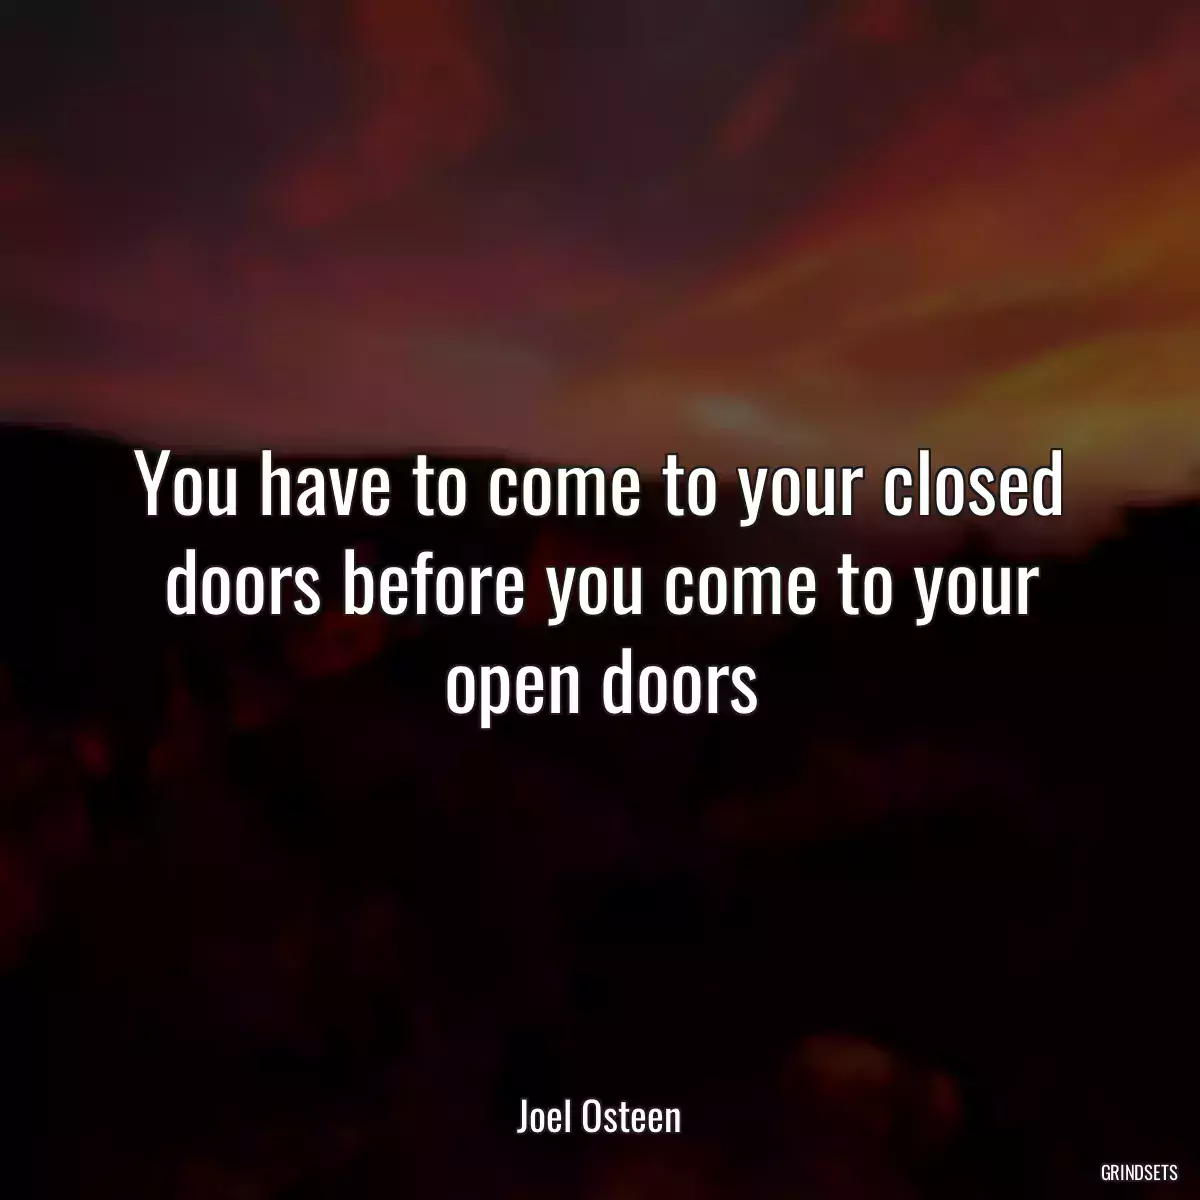 You have to come to your closed doors before you come to your open doors